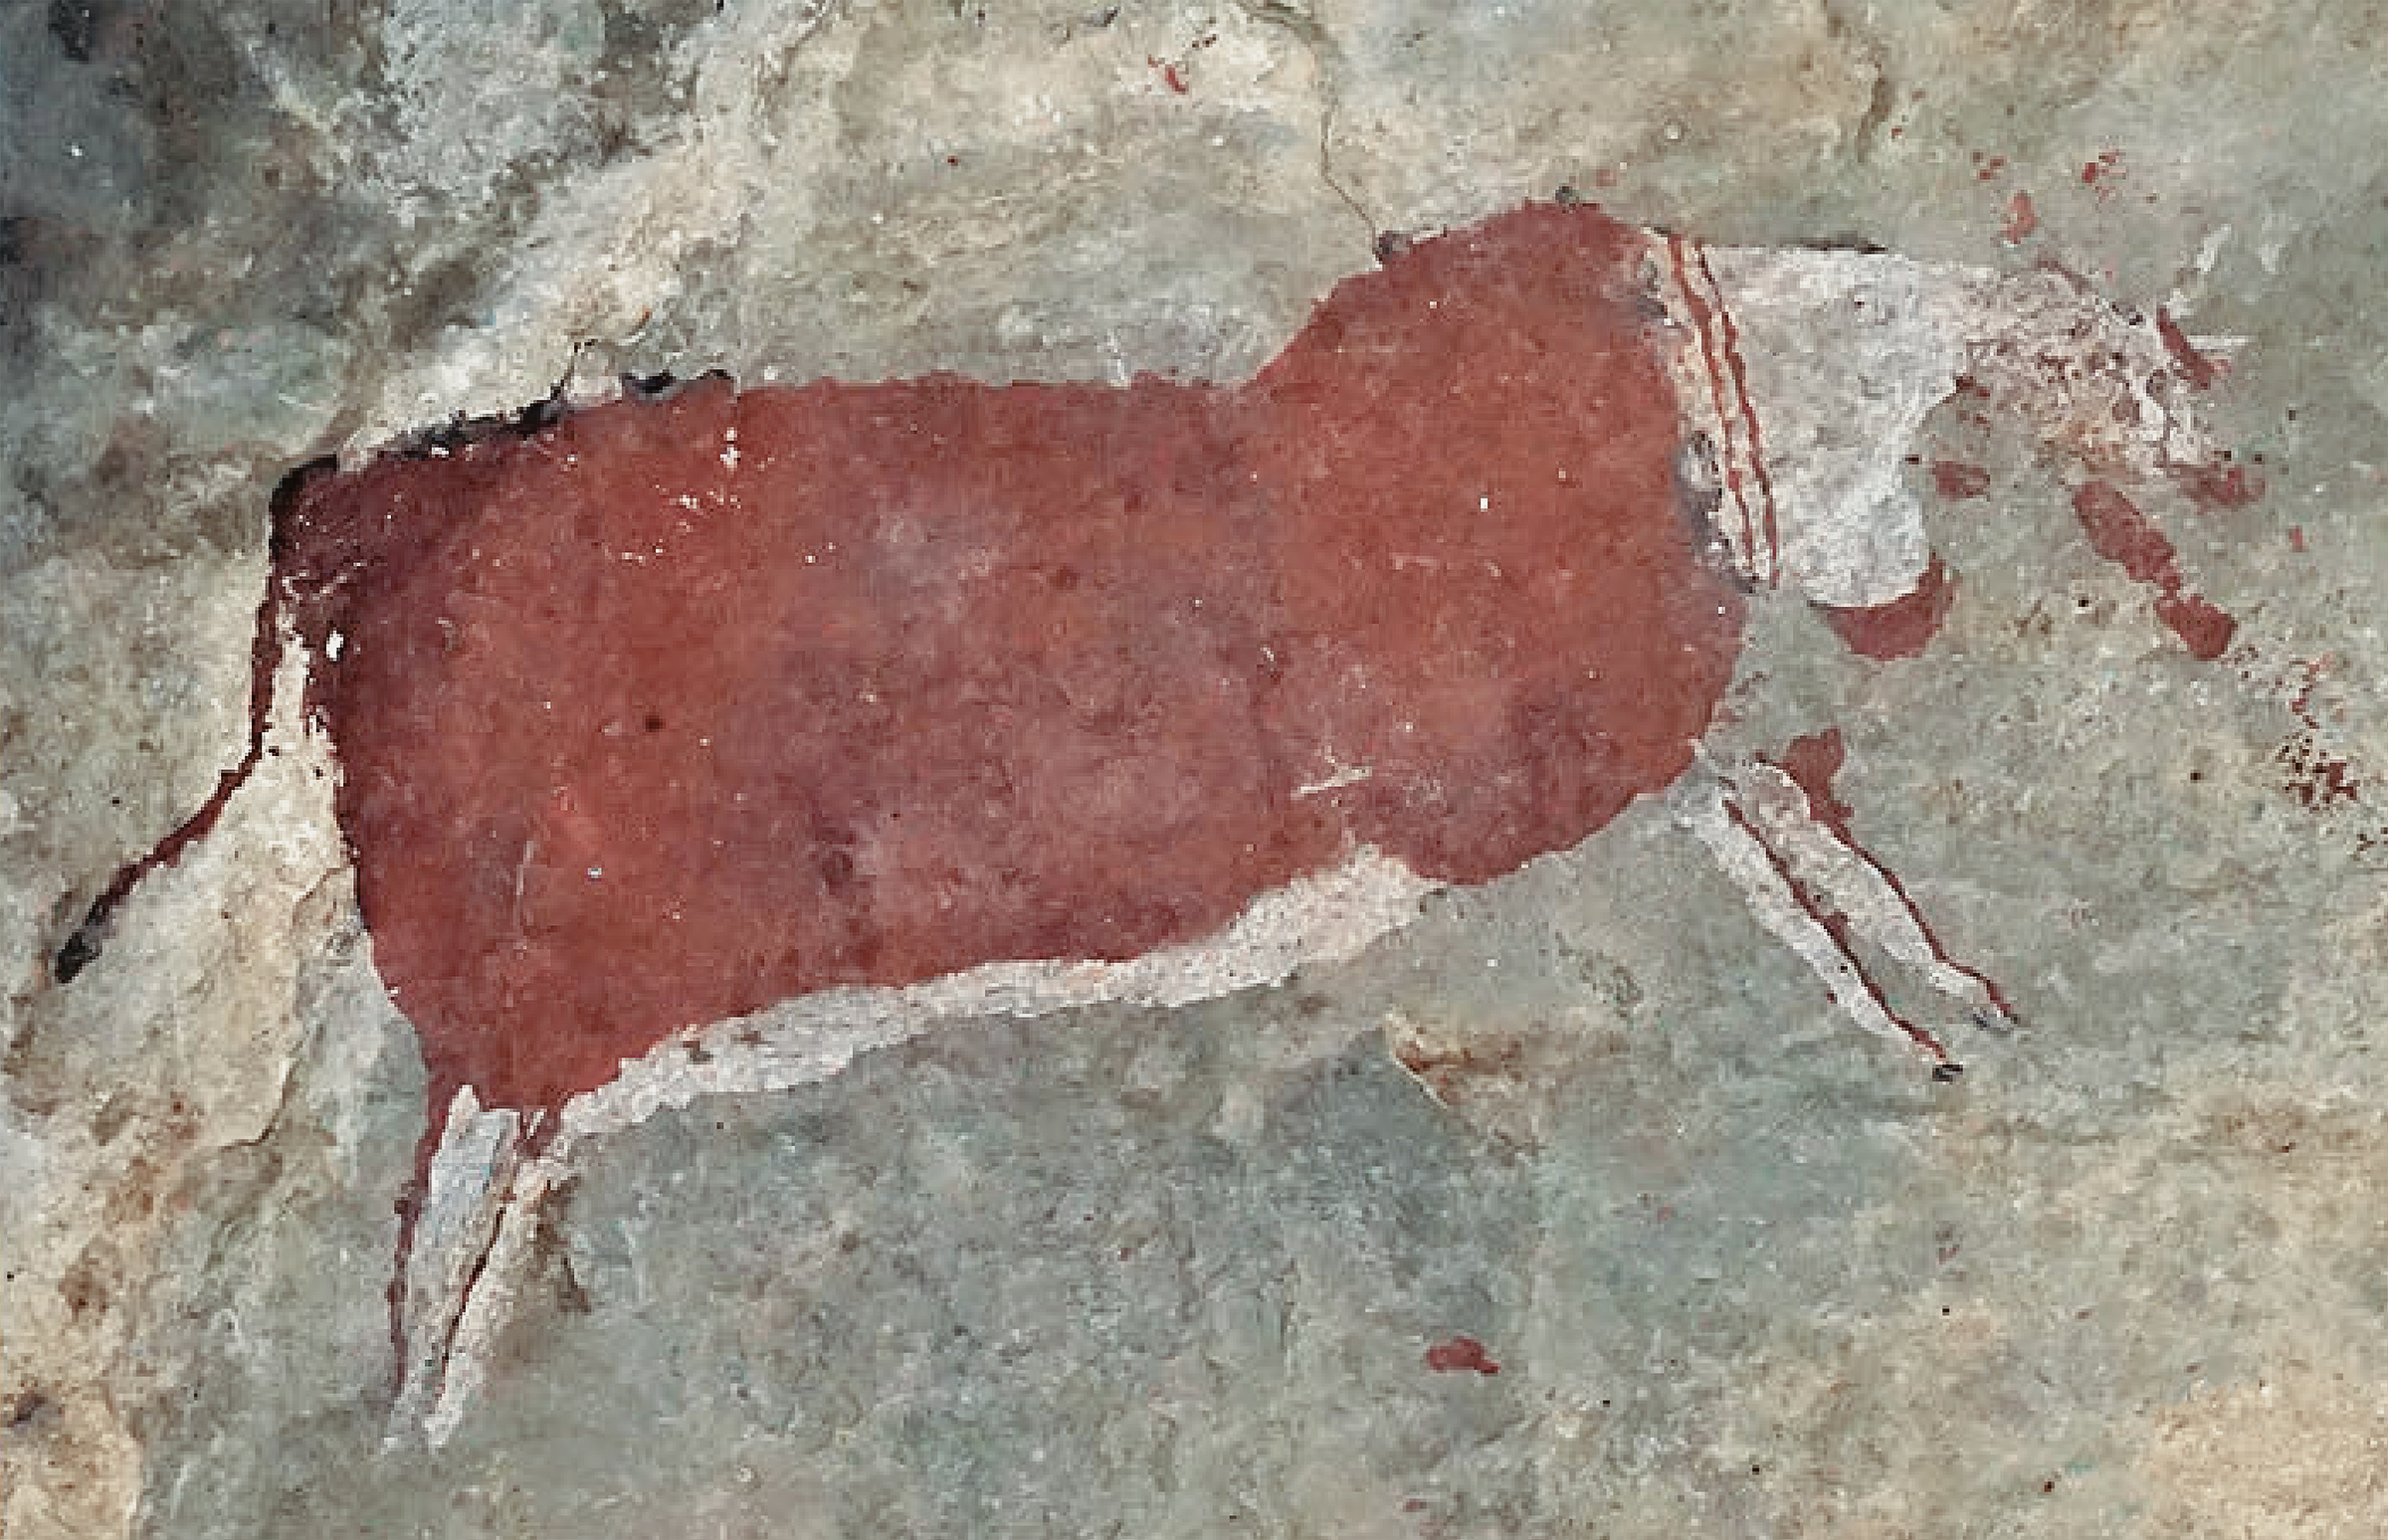 Painting from the southern Maloti-Drakensberg rock-shelter: An eland depicted in poster-like block colour, likely painted post-contact